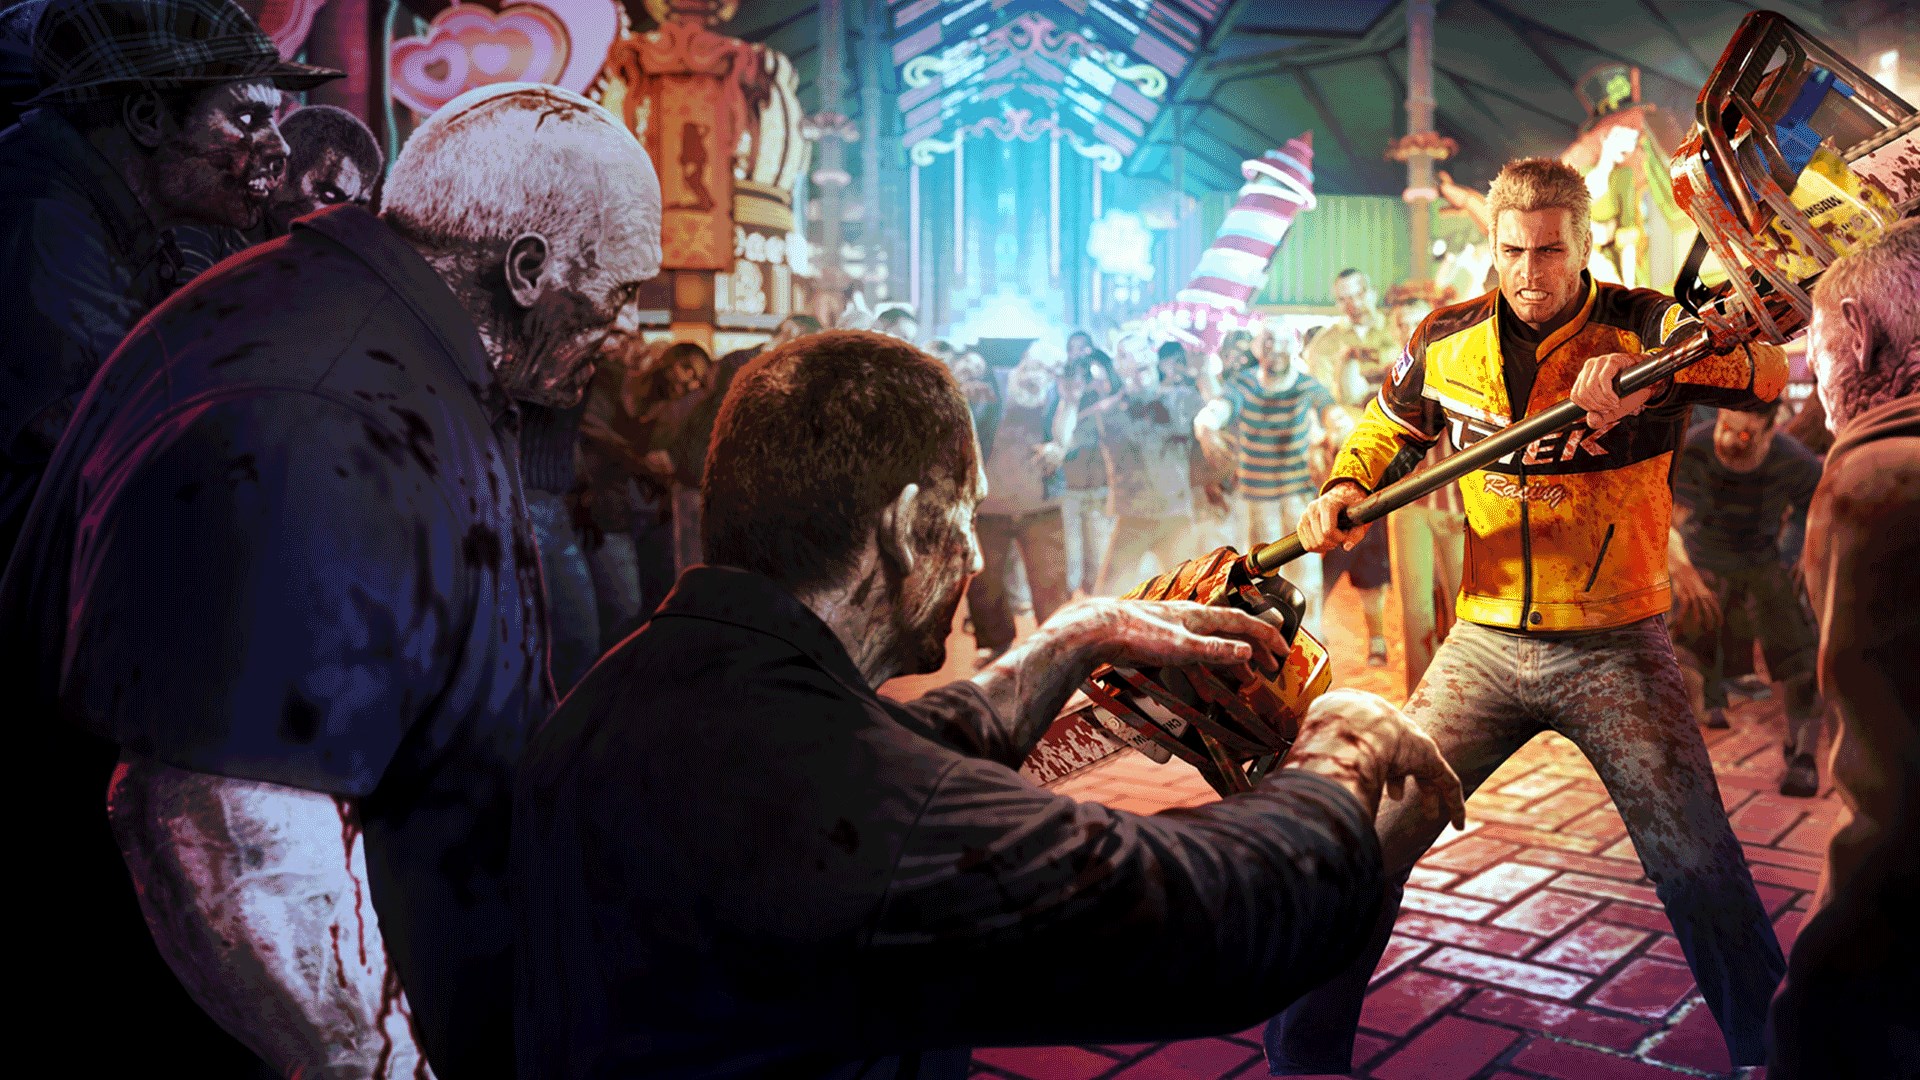 Dead Rising Triple Pack Is Now Available For Digital Pre-order And